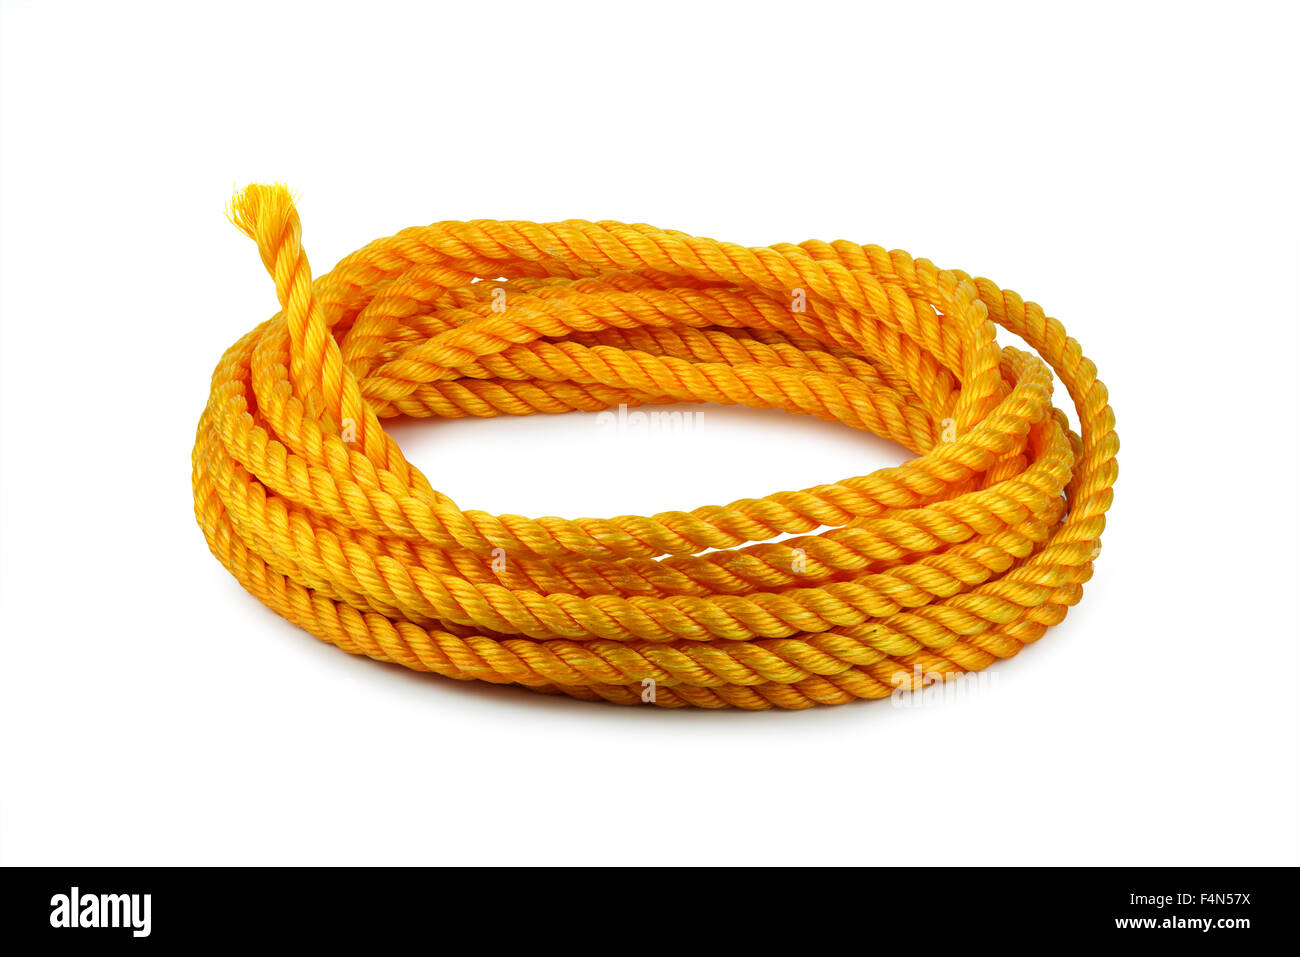 Close Thick Rope Rope Spiral Shape Stock Photo 2308836517